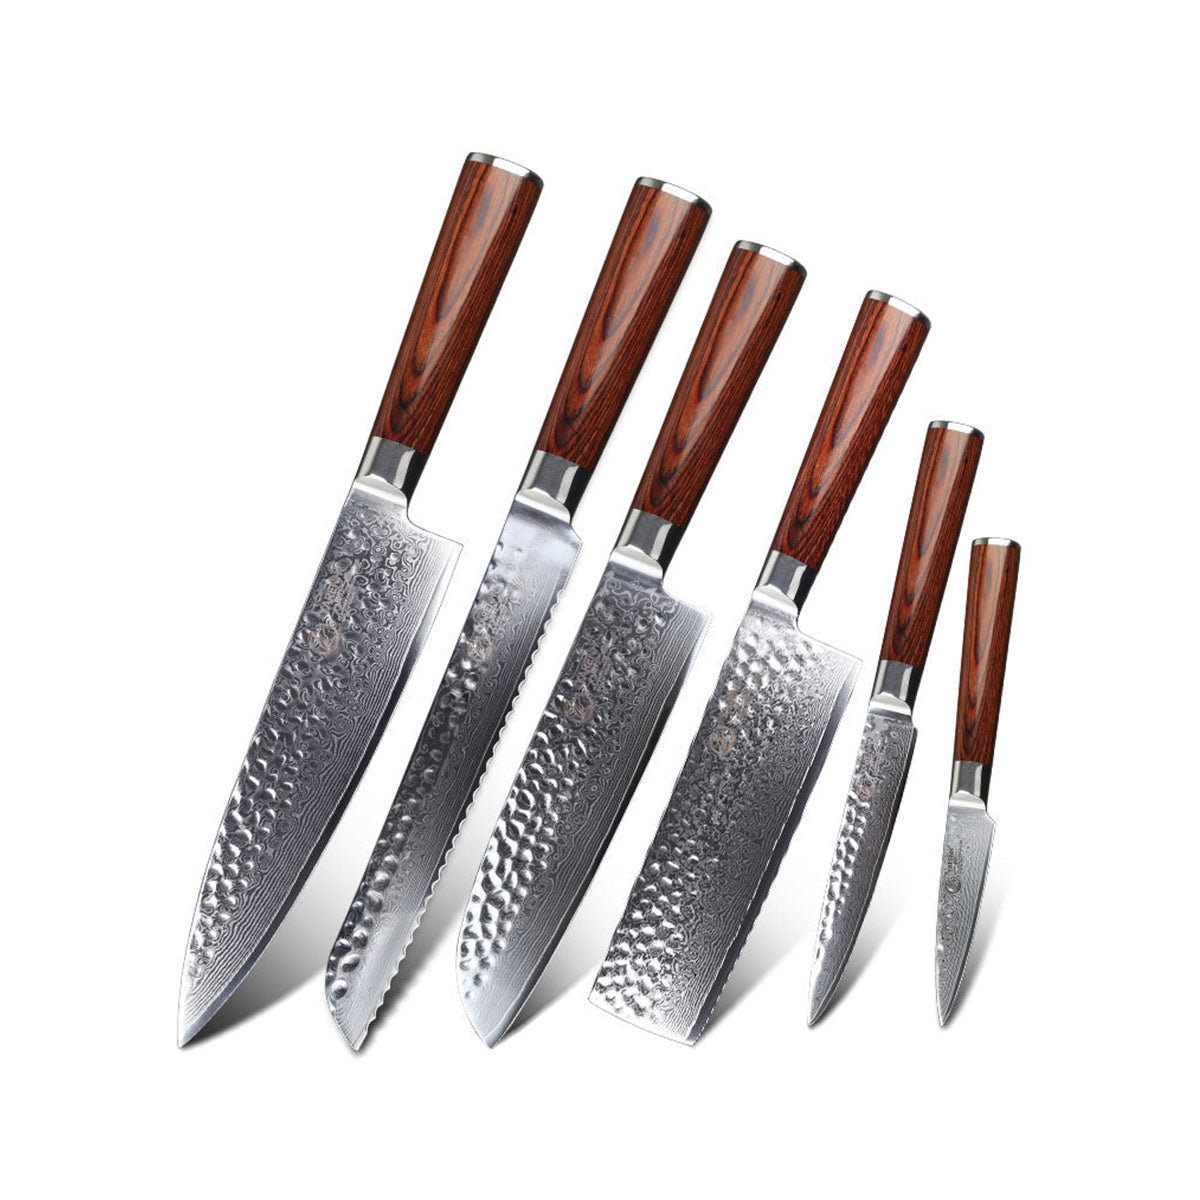 Forged Professional Chef Knife Set